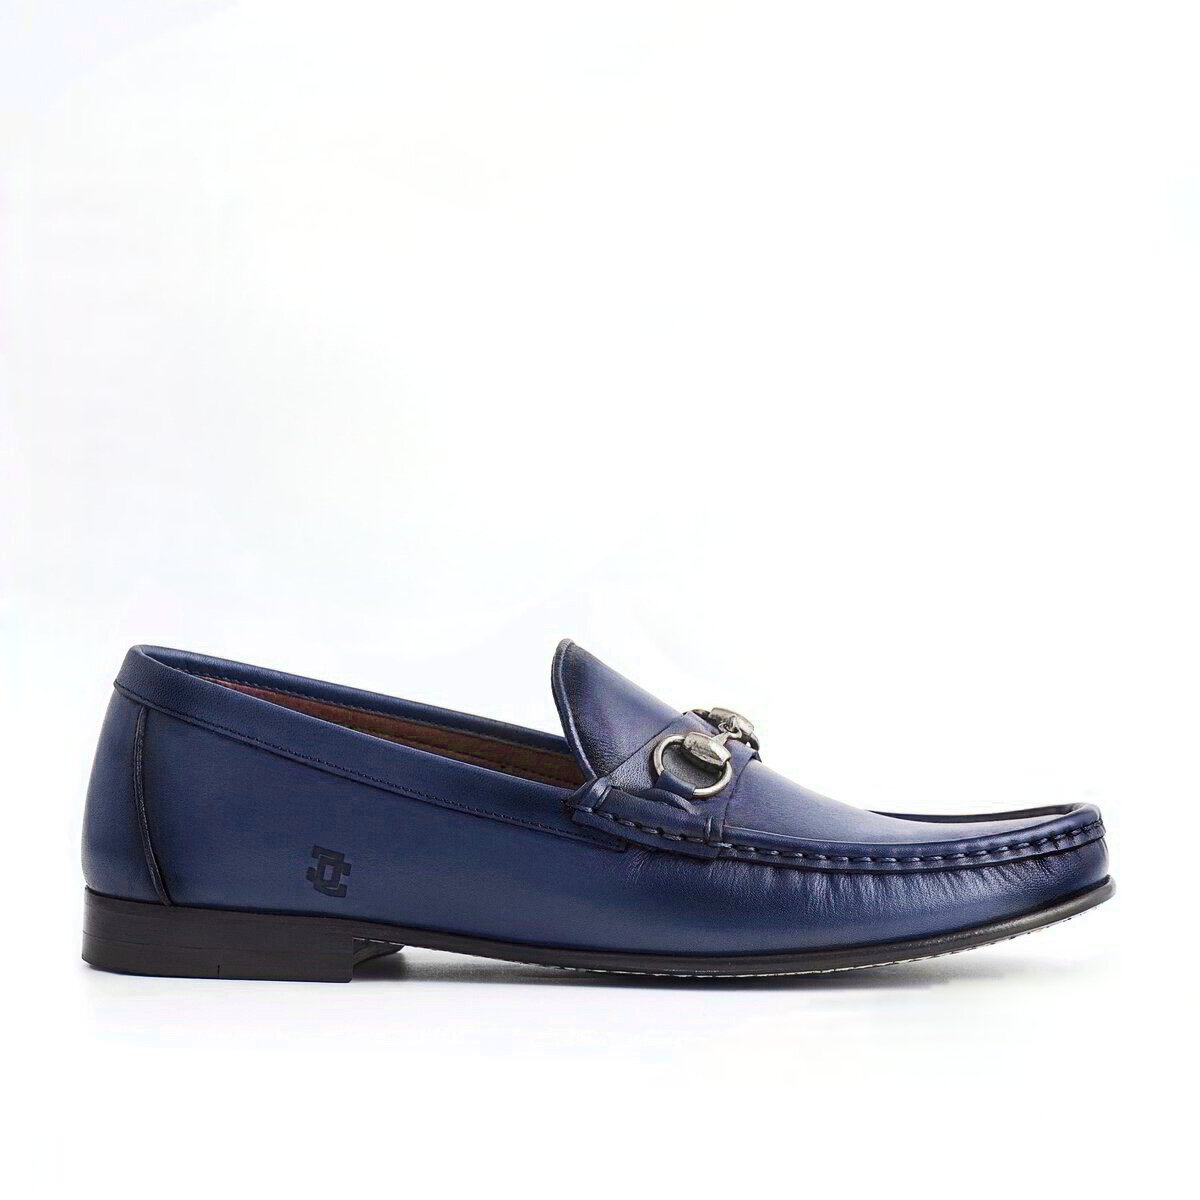 Cuero Blue Loafers by Juyi Calton